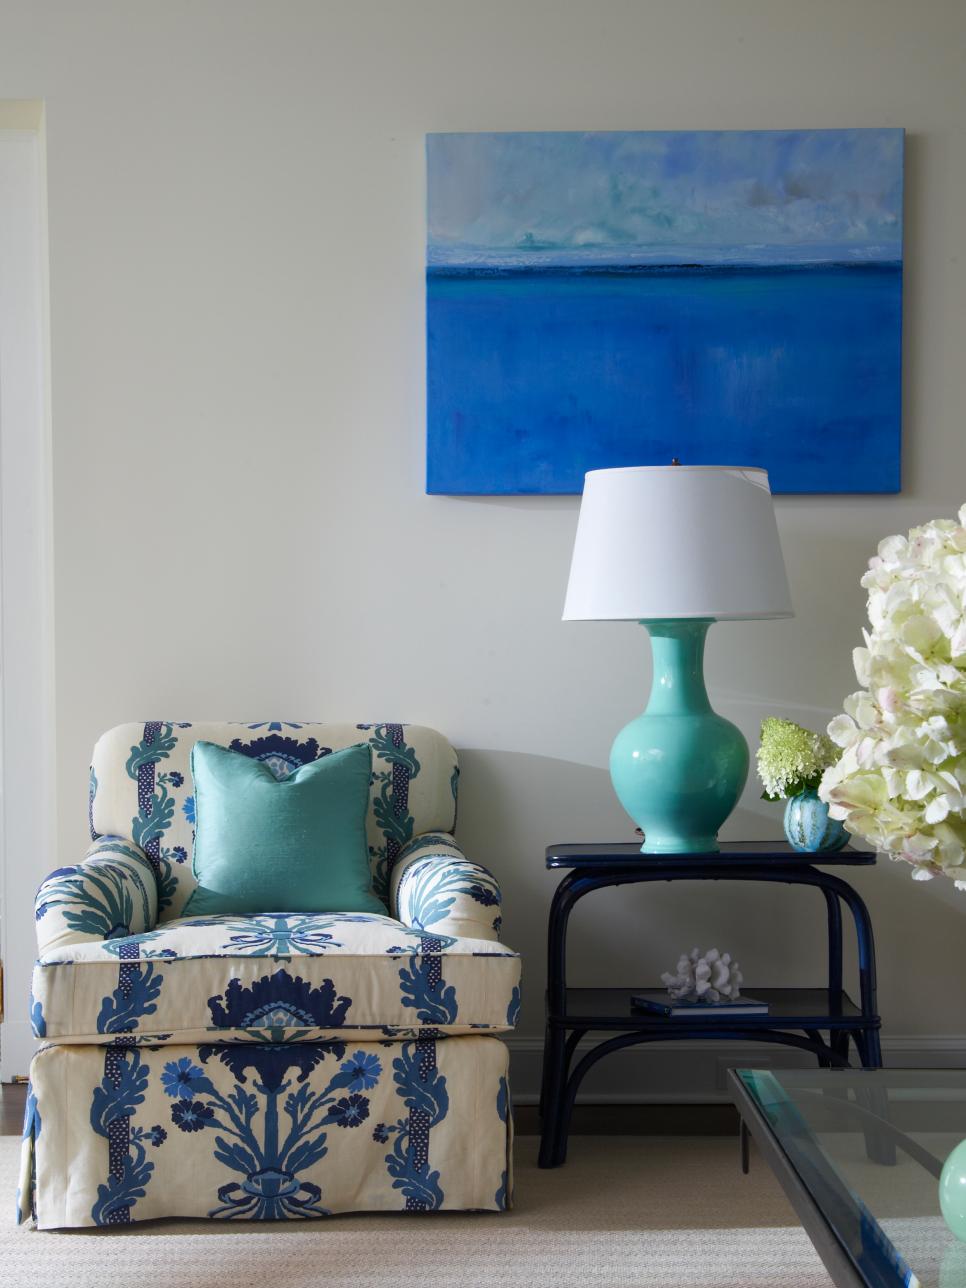 Unique Armchair and Side Table With Blue Painting and Turquoise Lamp